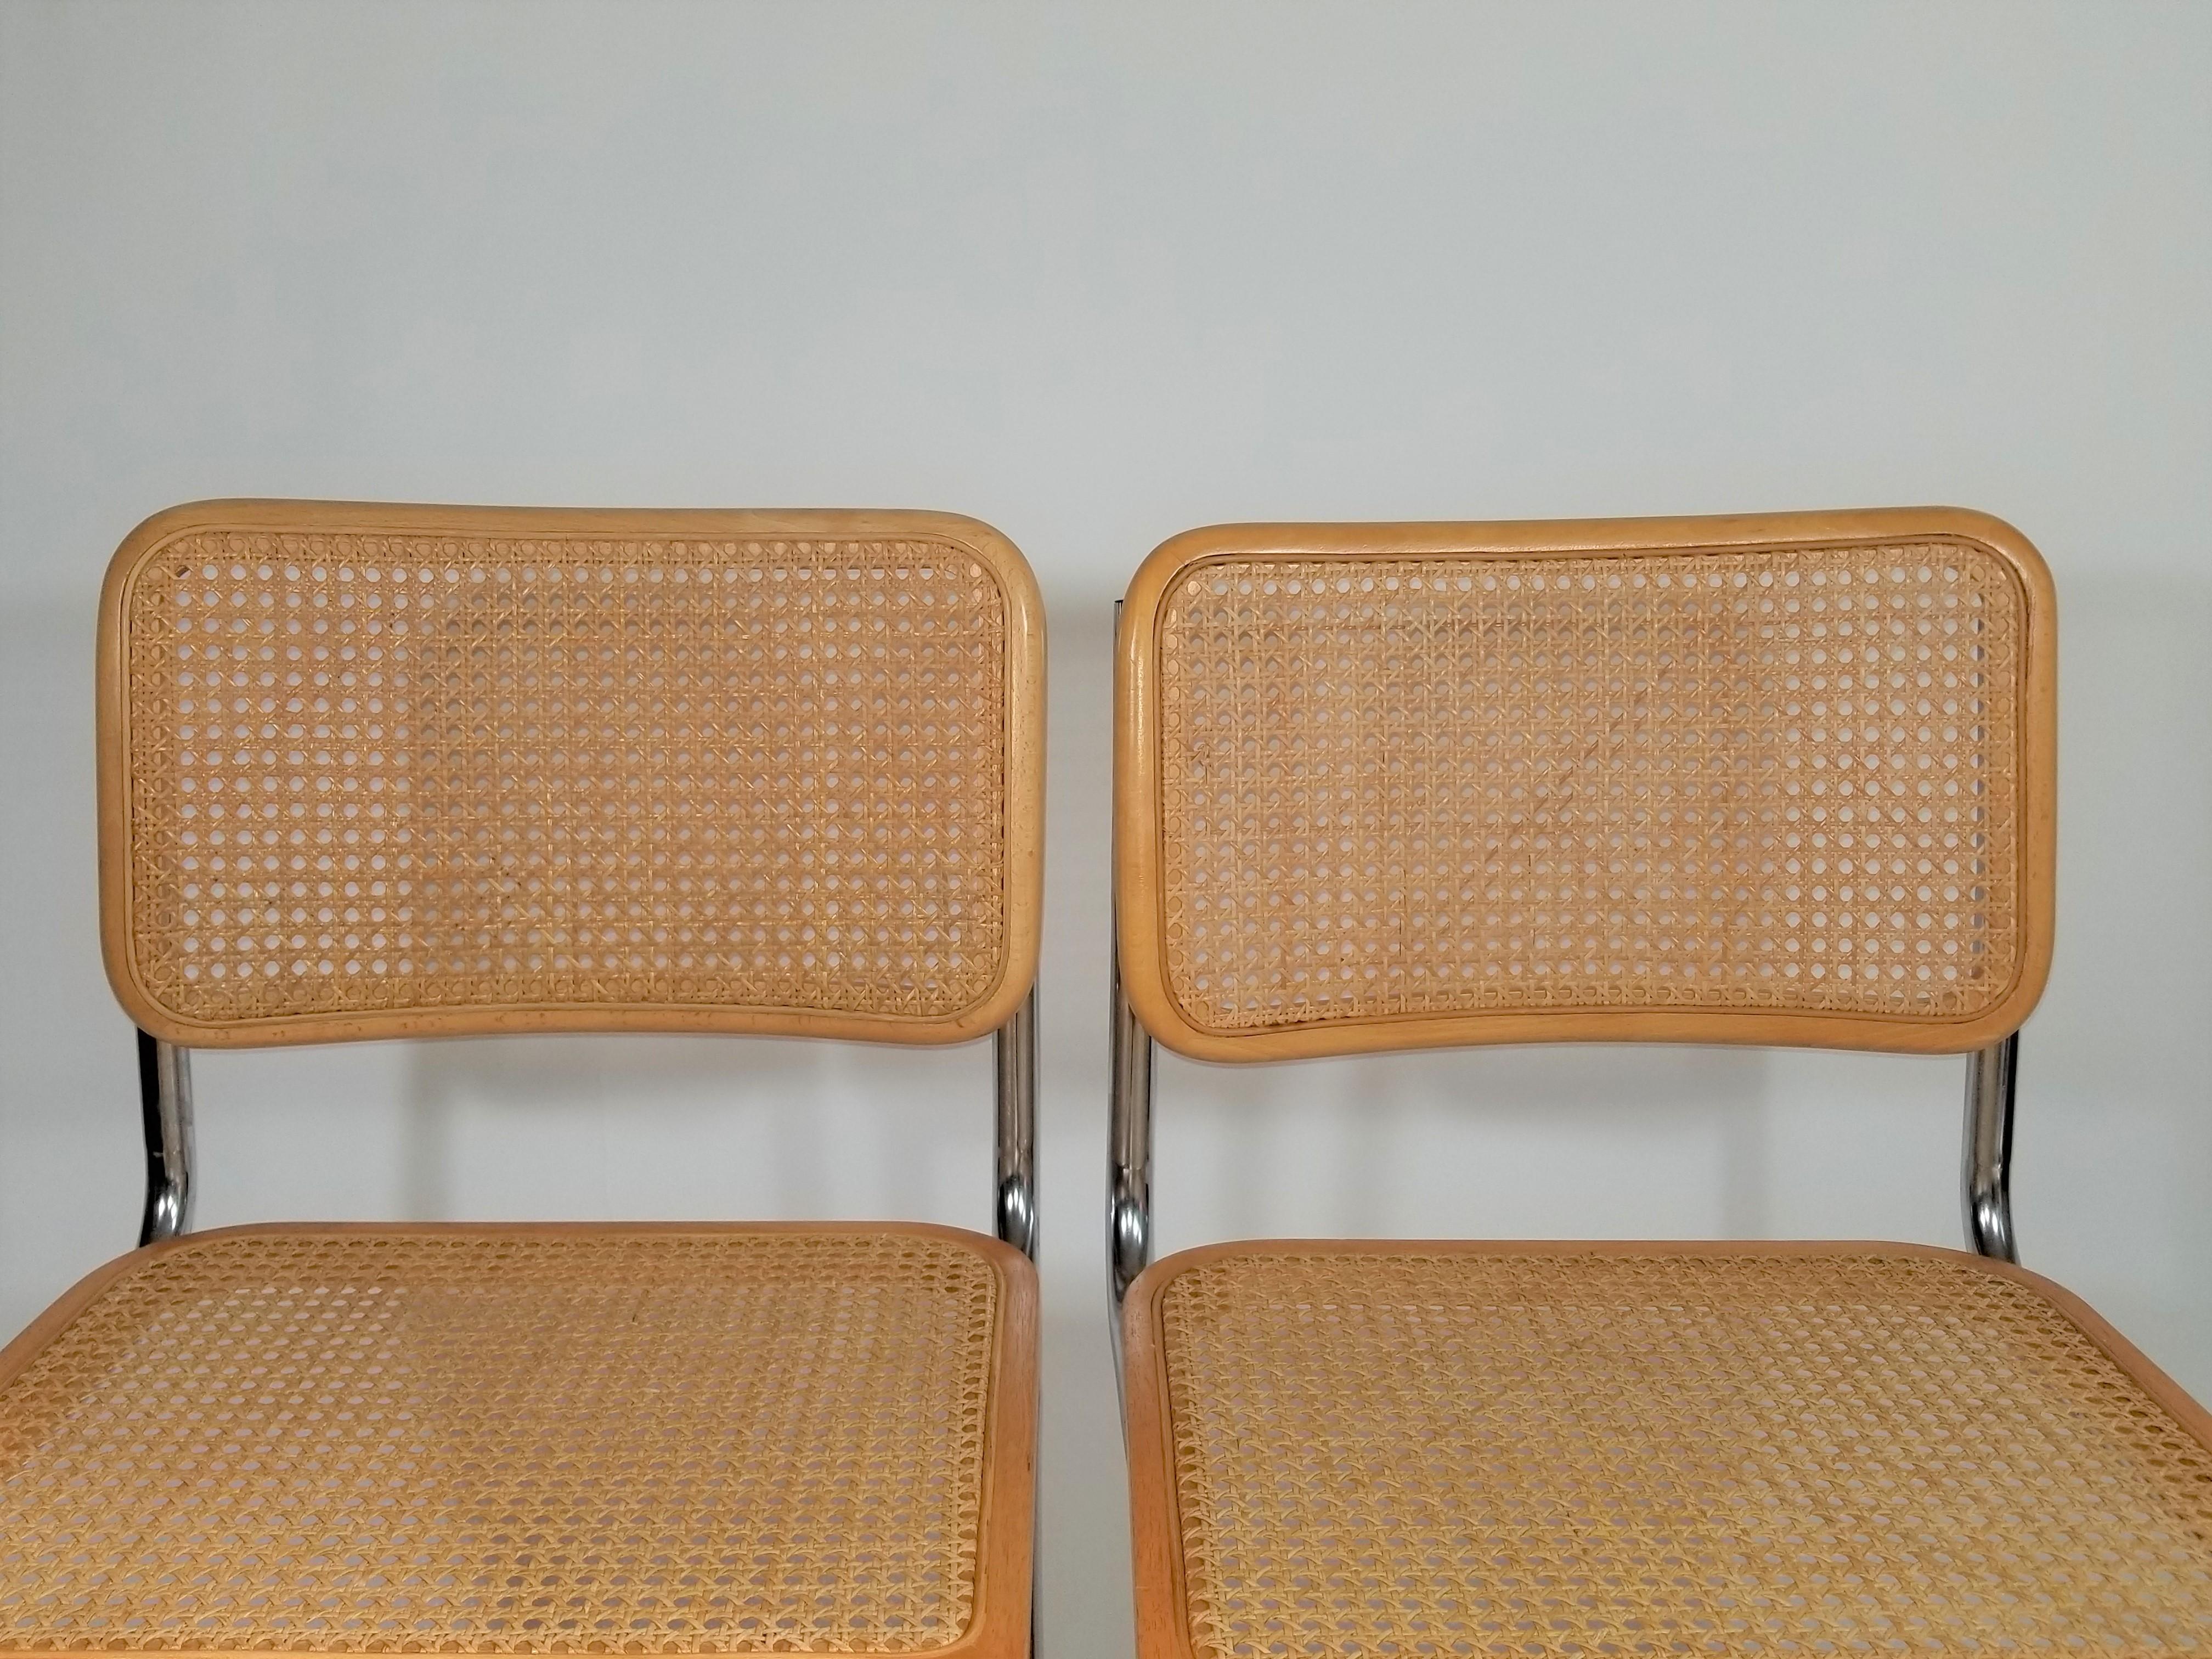 Caning Marcel Breuer Cesca Side Chairs Midcentury Set of 2